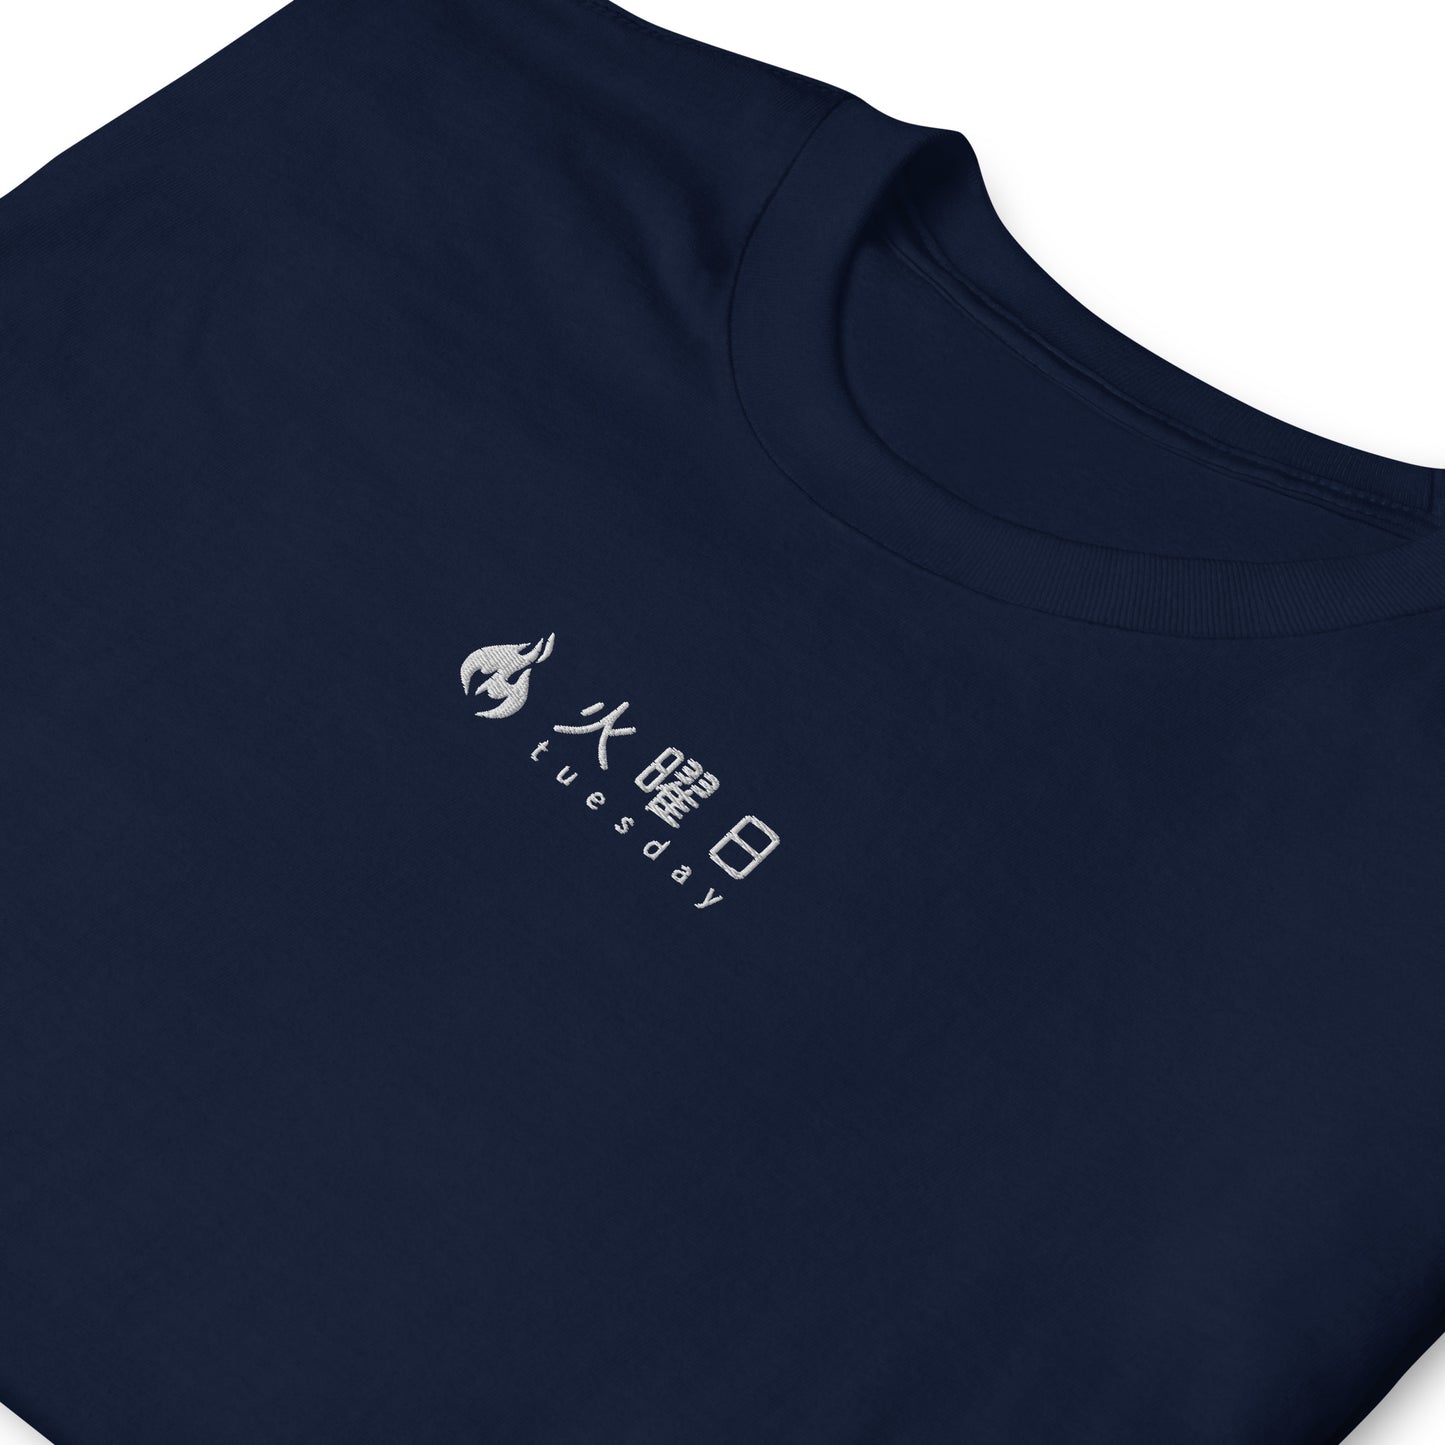 Navy High Quality Tee - Front Design with an Black embroidery "Tuesday" in Japanese and English